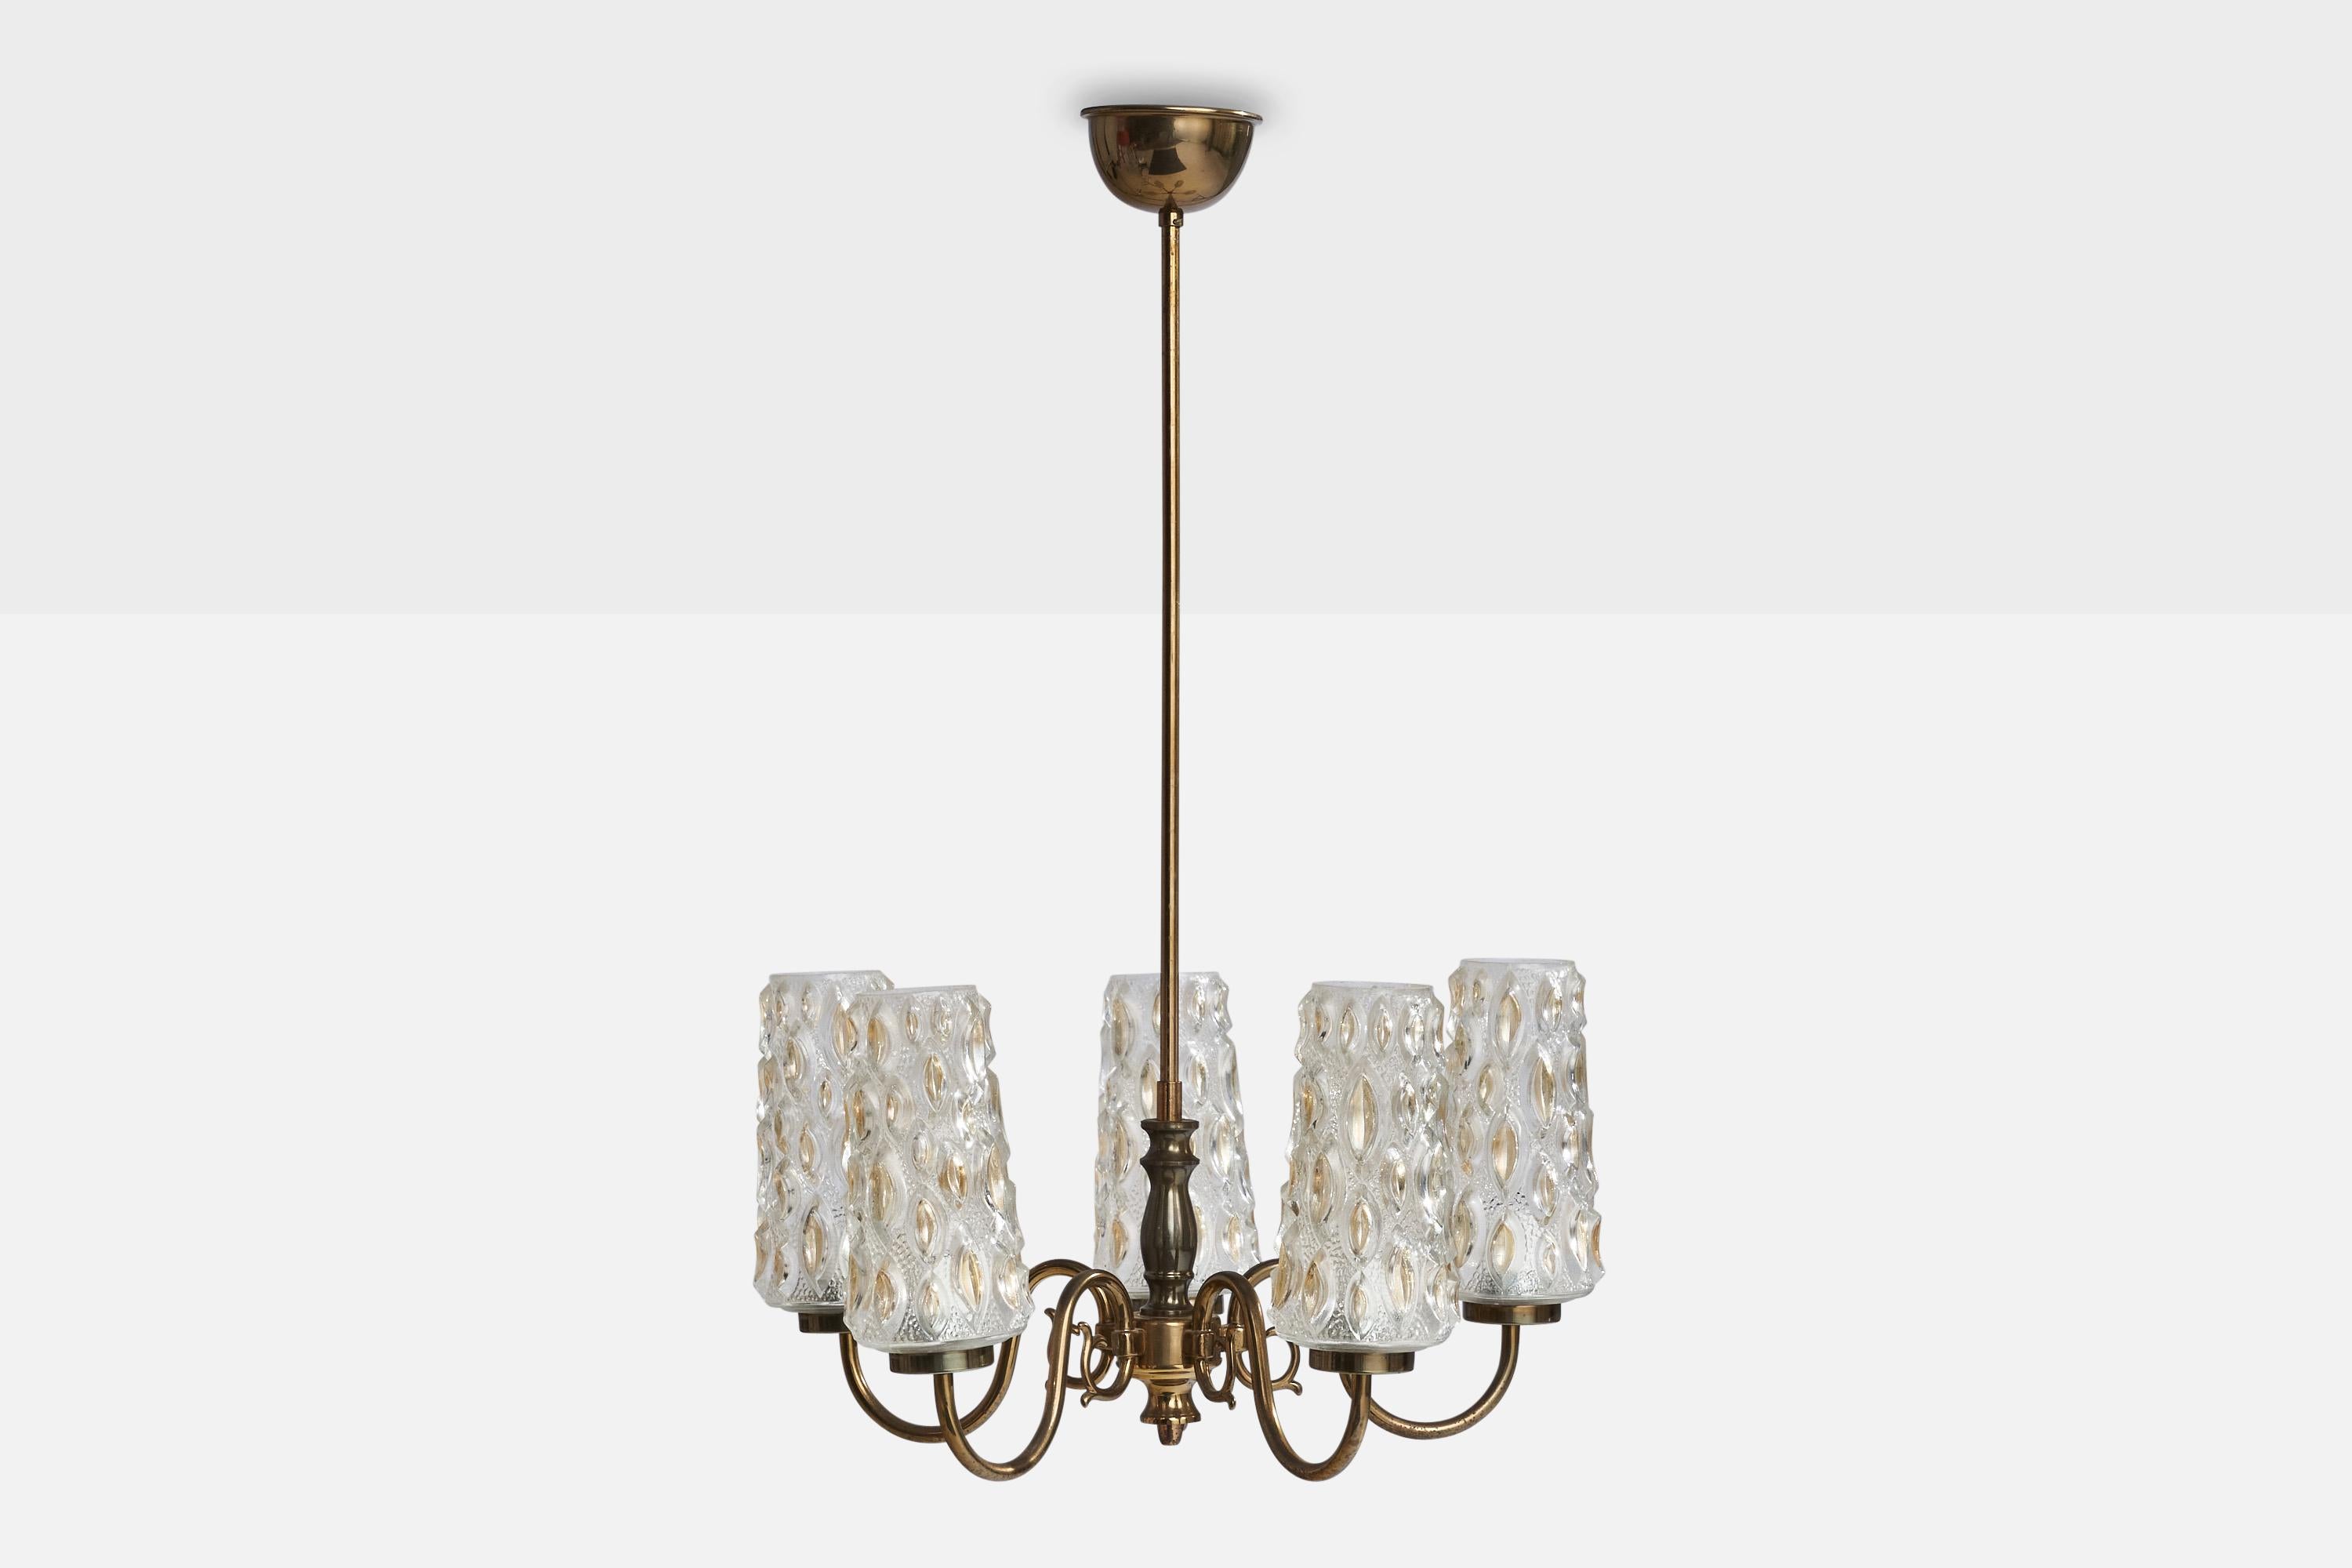 A brass and glass chandelier designed and produced in Sweden, 1940s.

Dimensions of canopy (inches): 2” H x 3.5” Diameter
Socket takes standard E-14 bulbs. 5 sockets.There is no maximum wattage stated on the fixture. All lighting will be converted